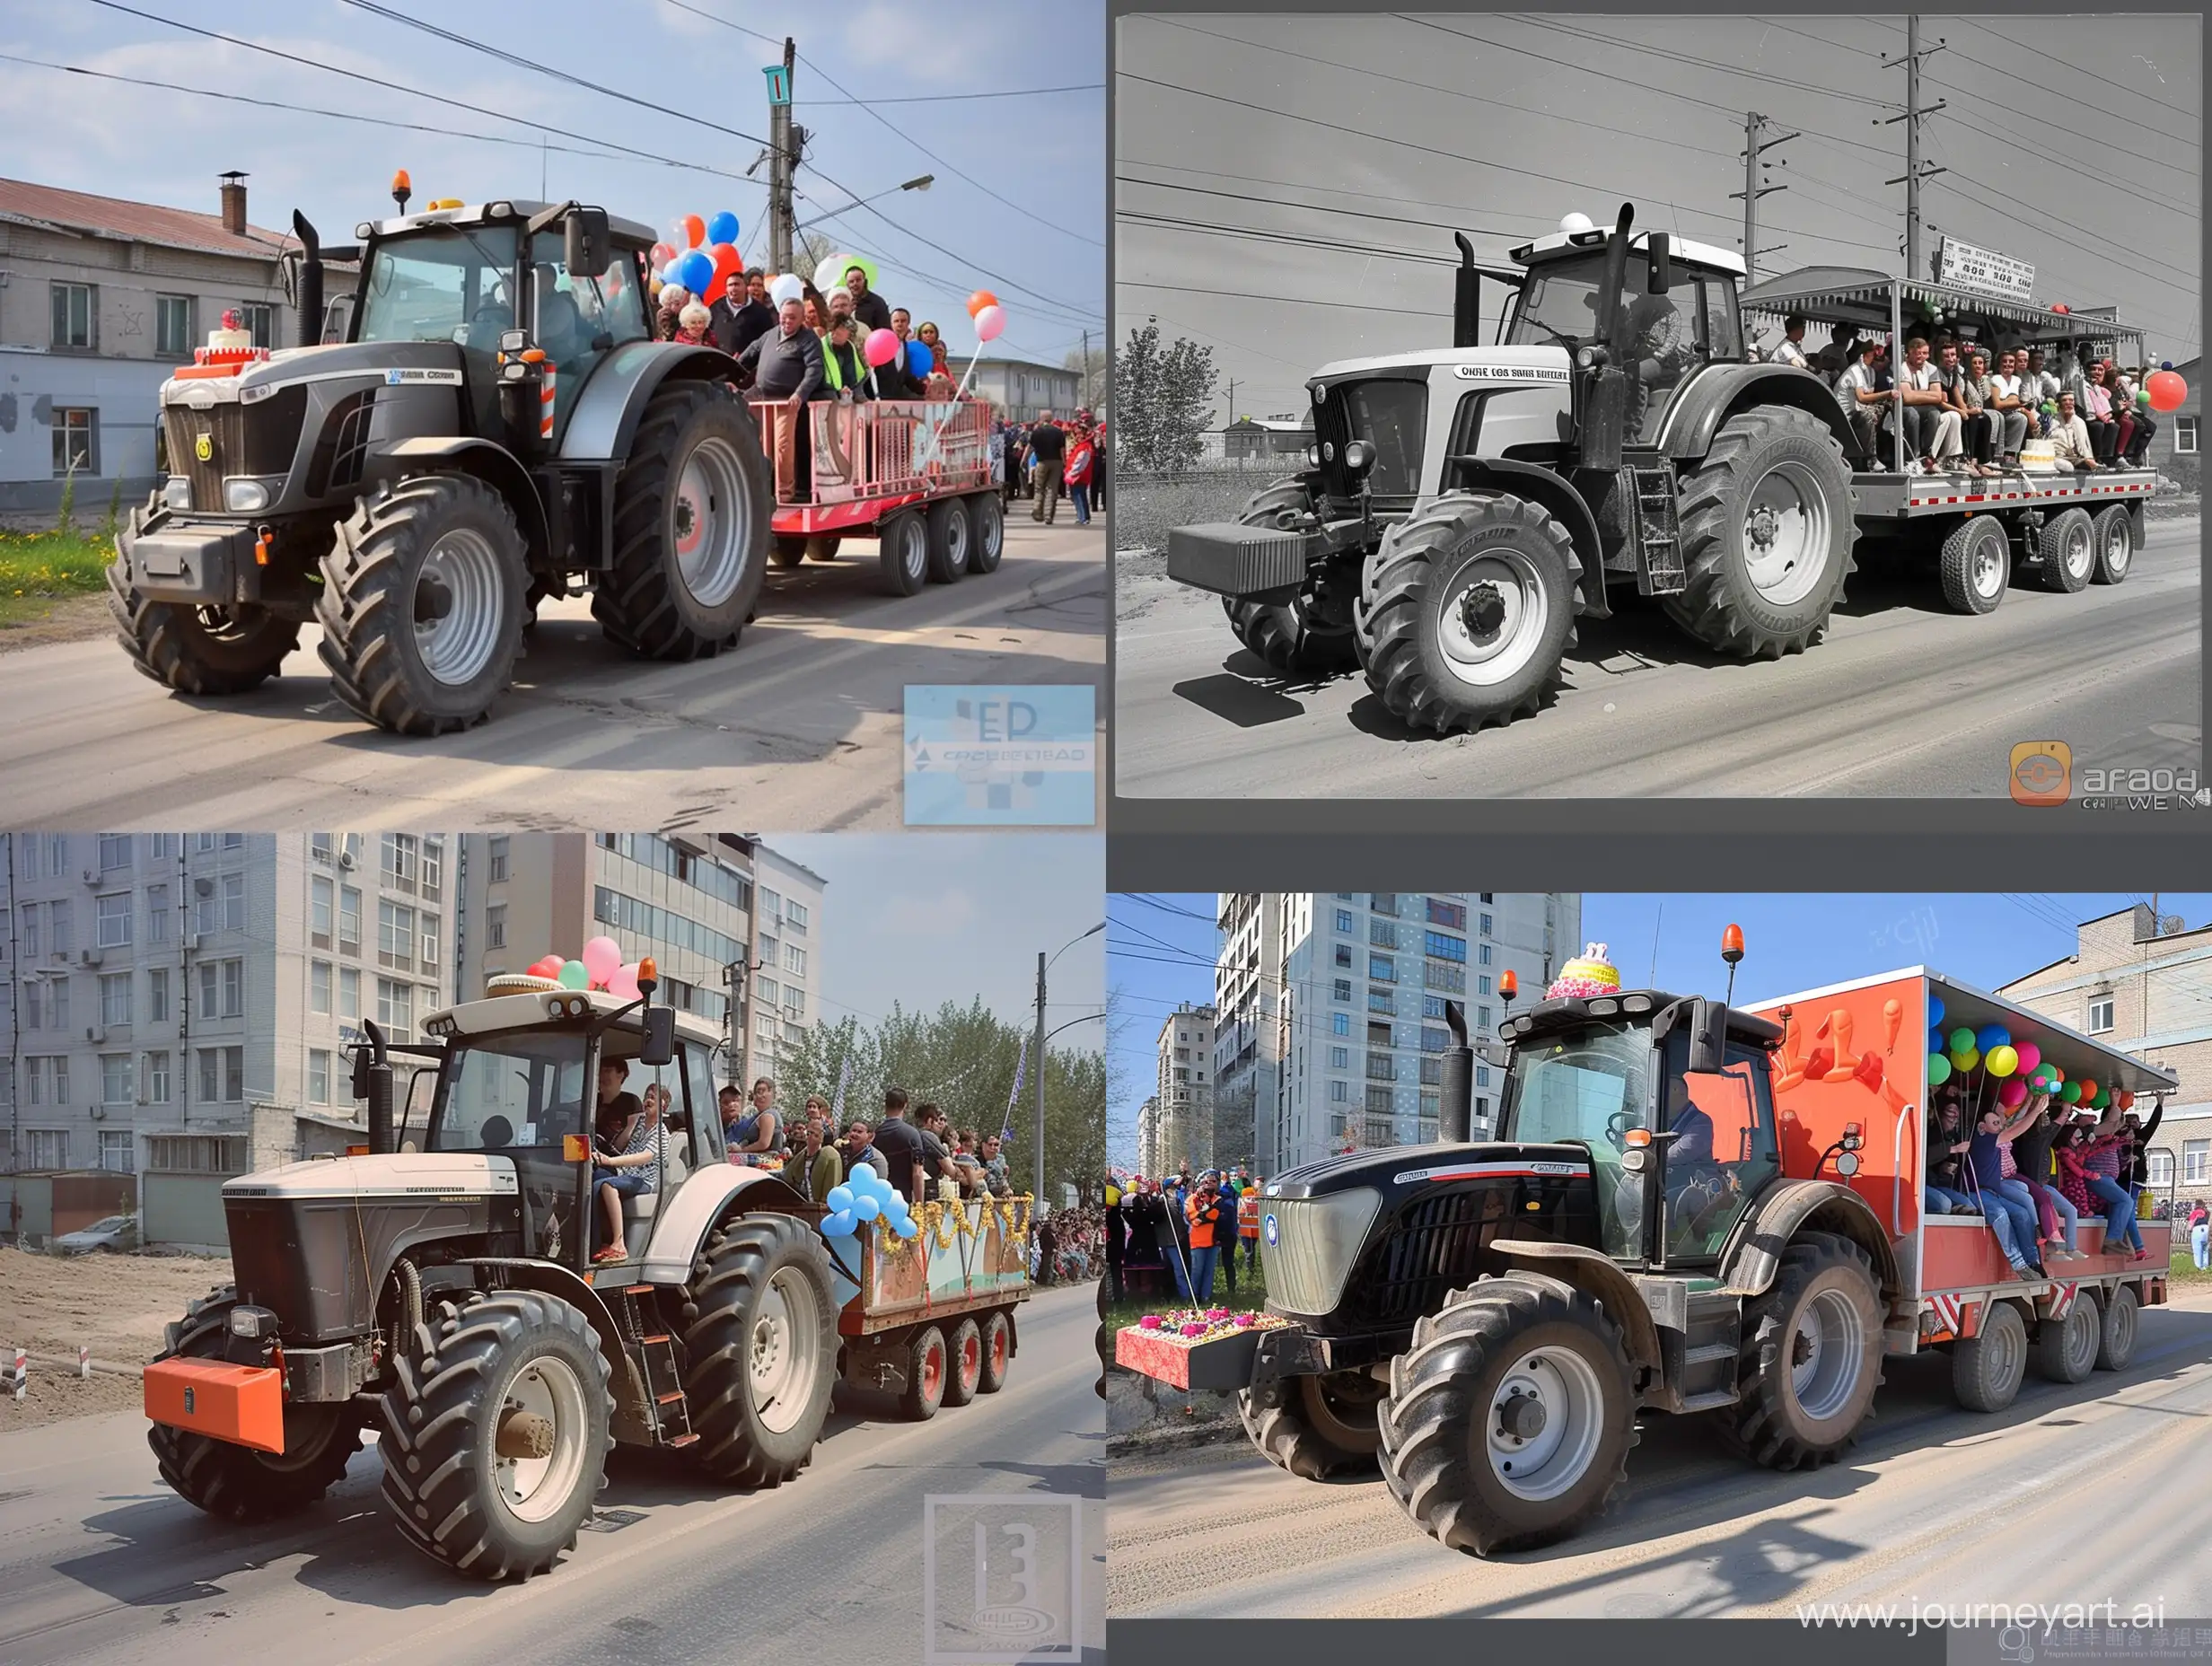 City-Anniversary-Celebration-Tractor-Parade-with-Cake-and-Balloons